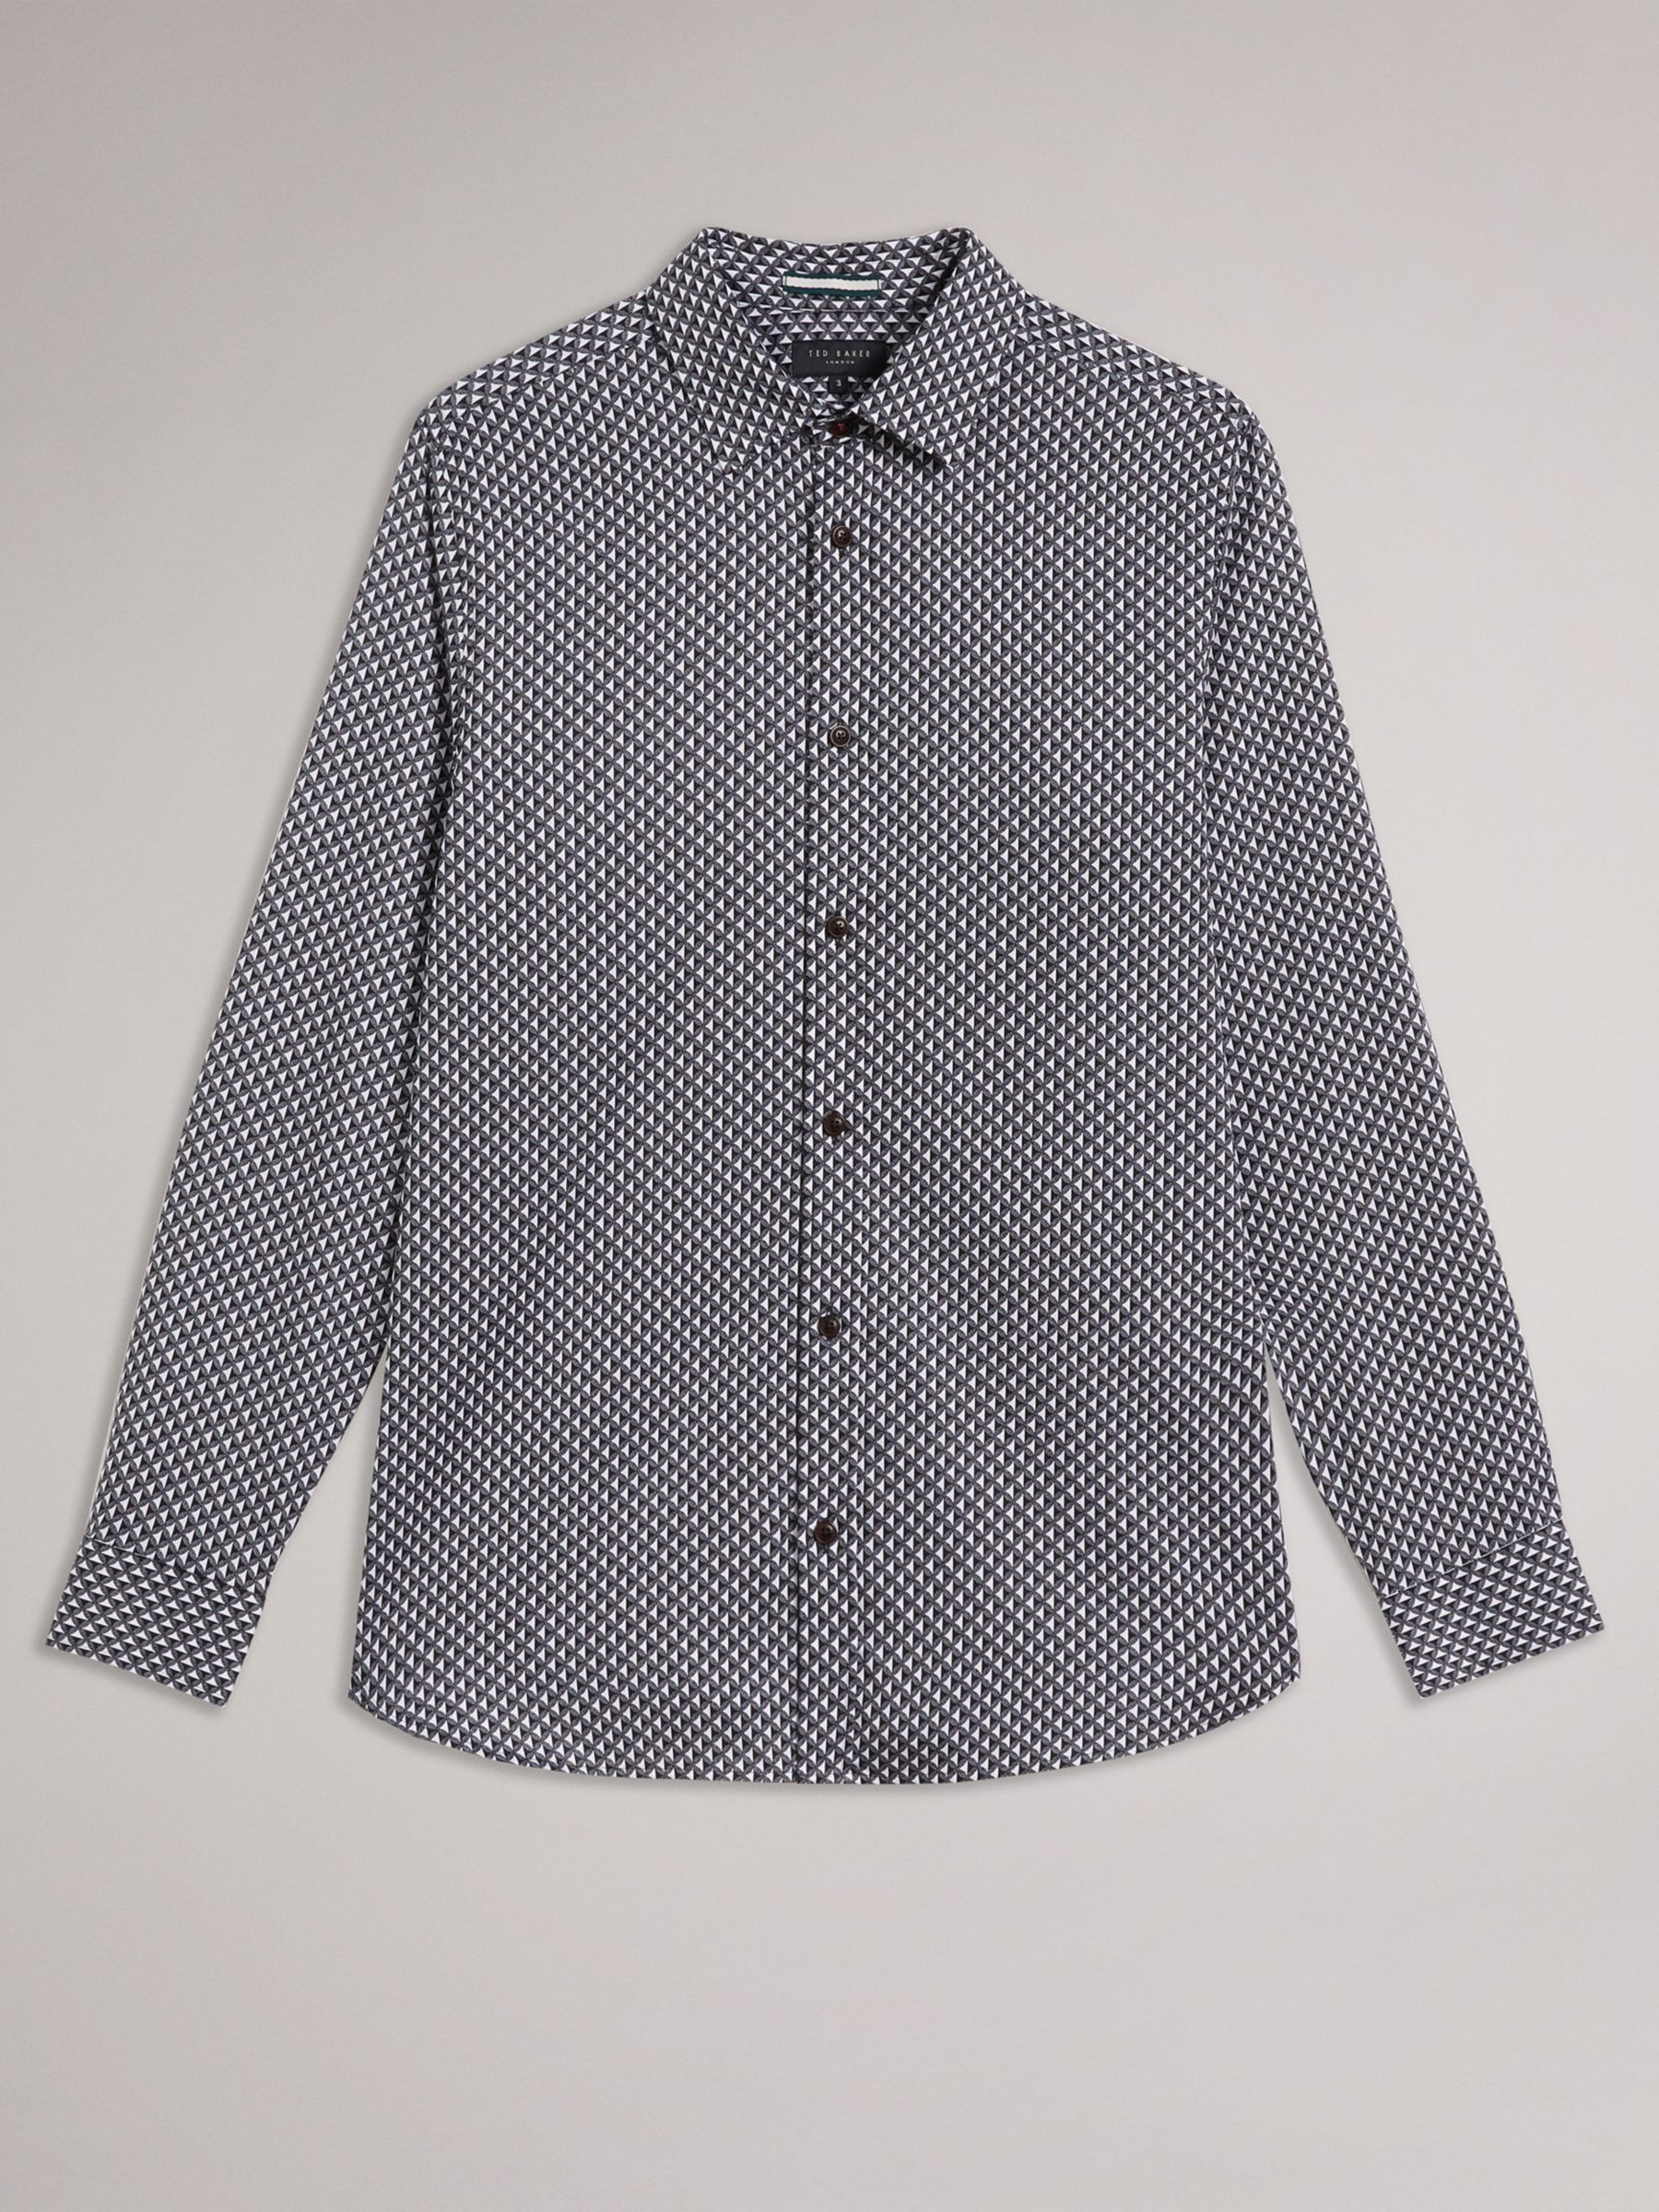 Ted Baker Ormsby Geometric Shirt, Black at John Lewis & Partners